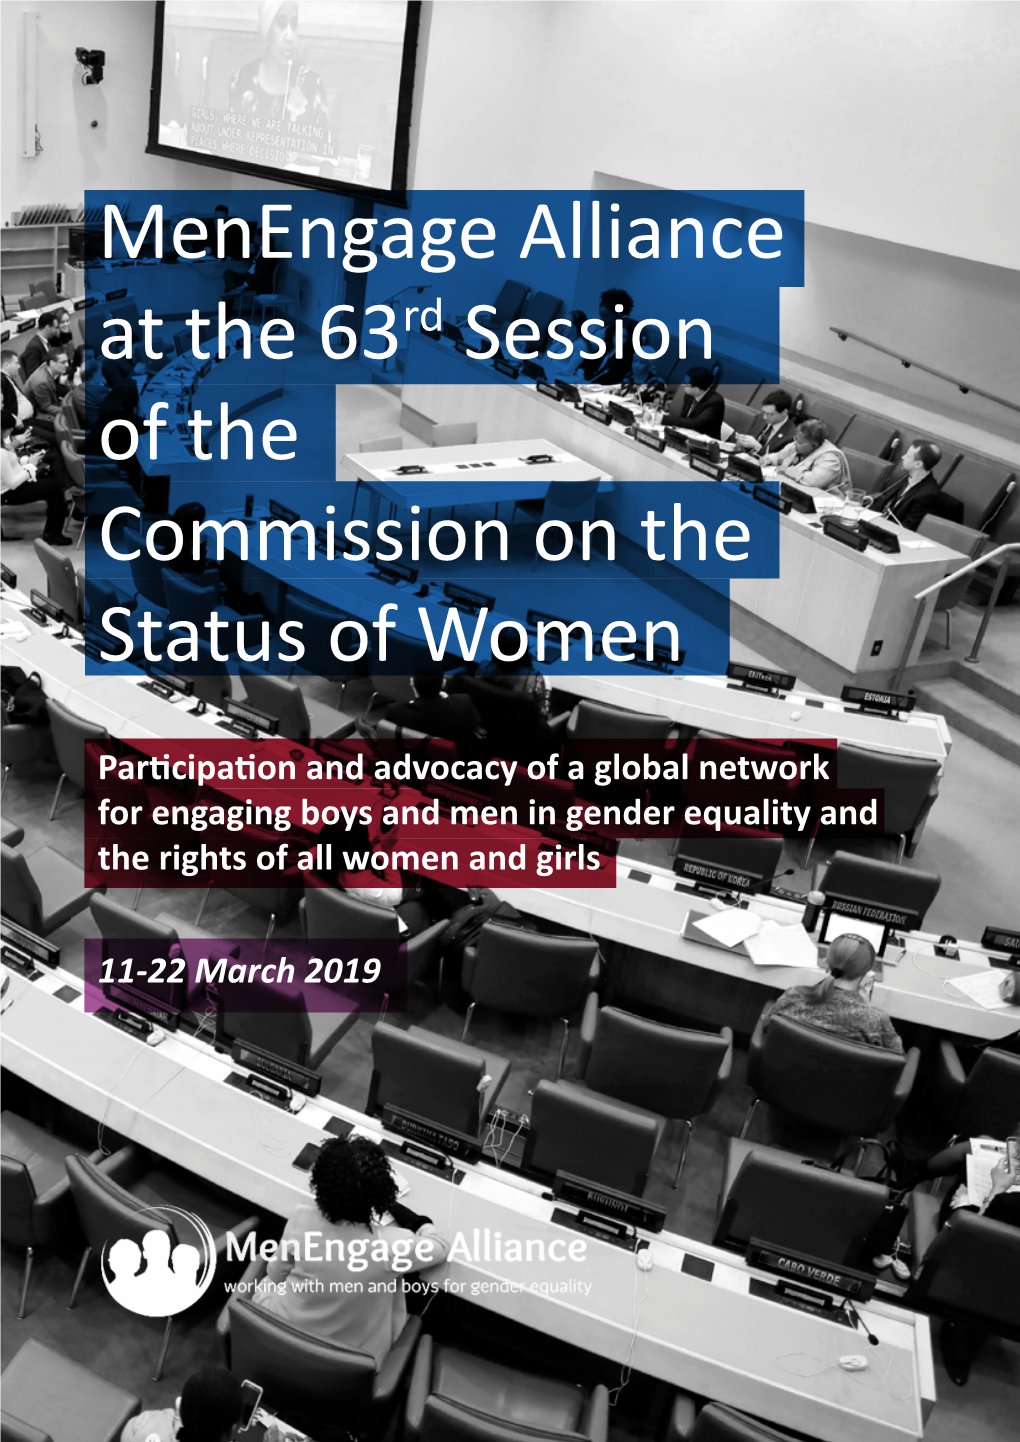 Menengage Alliance at the 63Rd Session of the Commission on the Status of Women